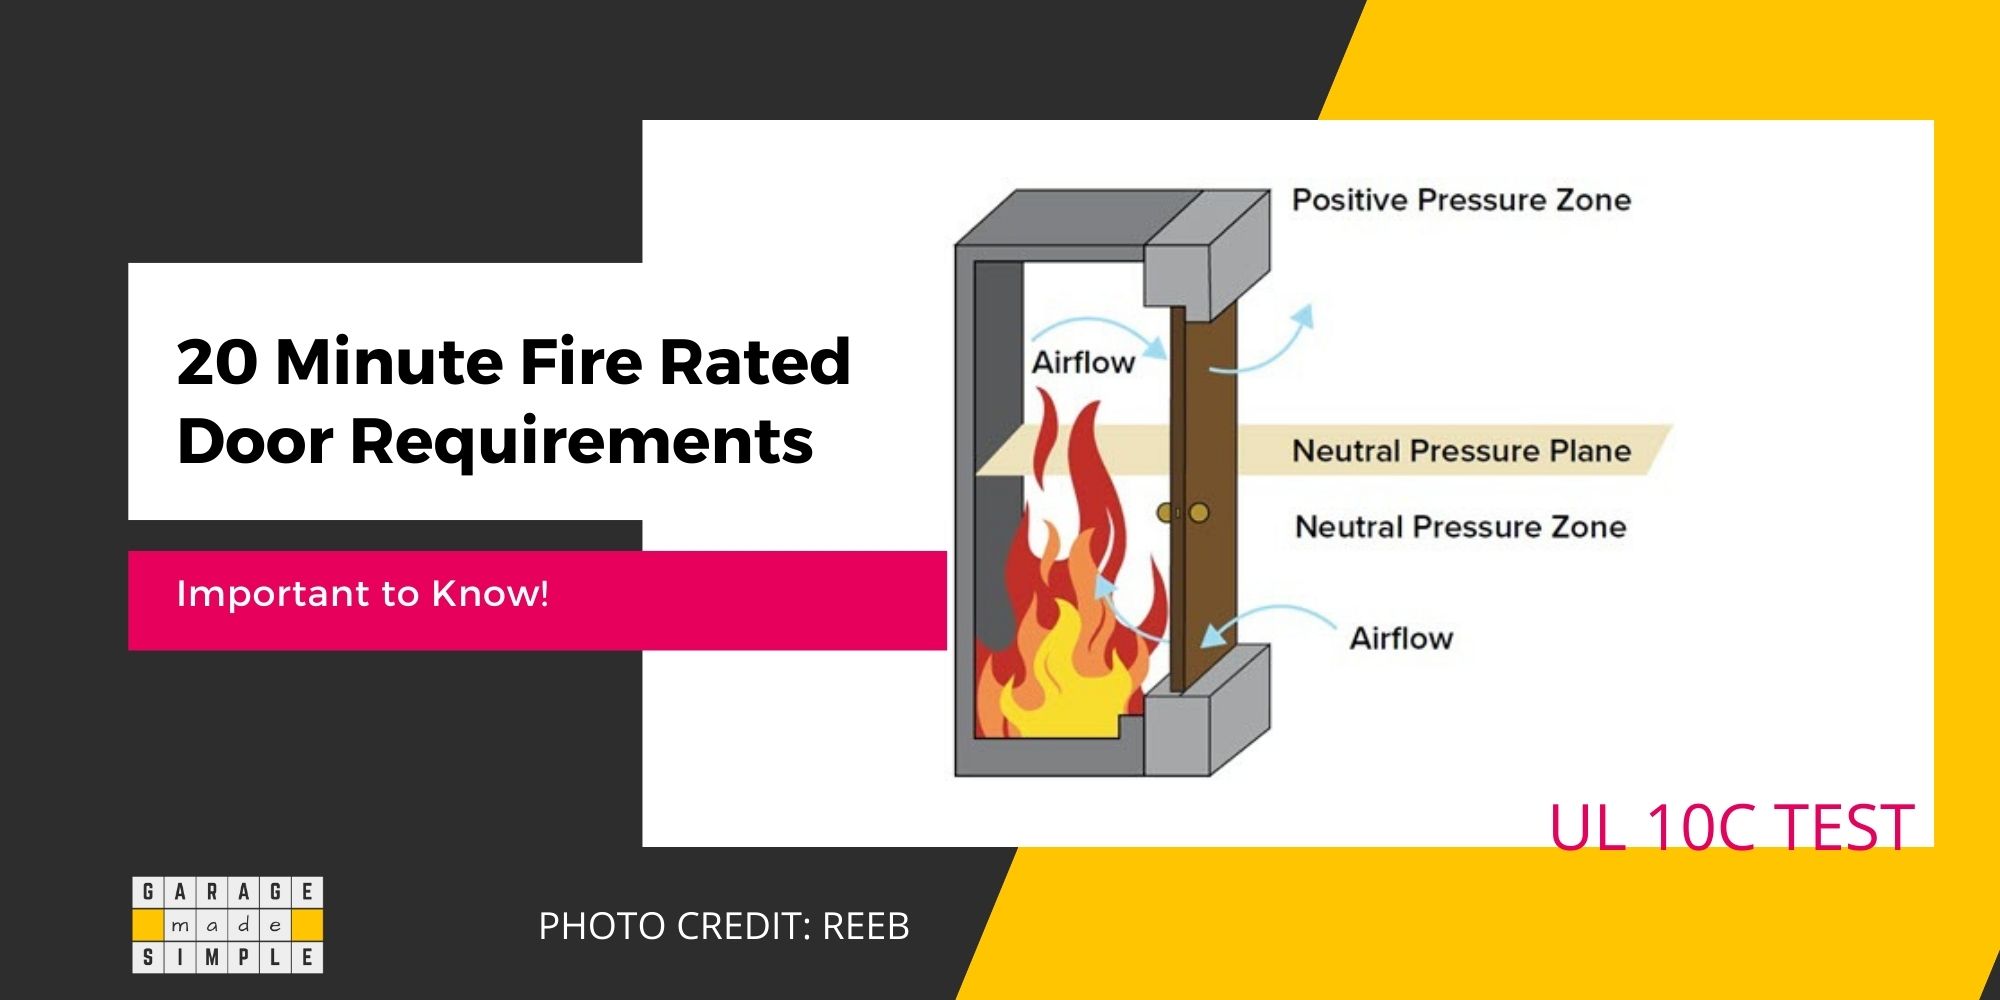 Why Should You Know The 20 Minute Fire Rated Door Requirements?